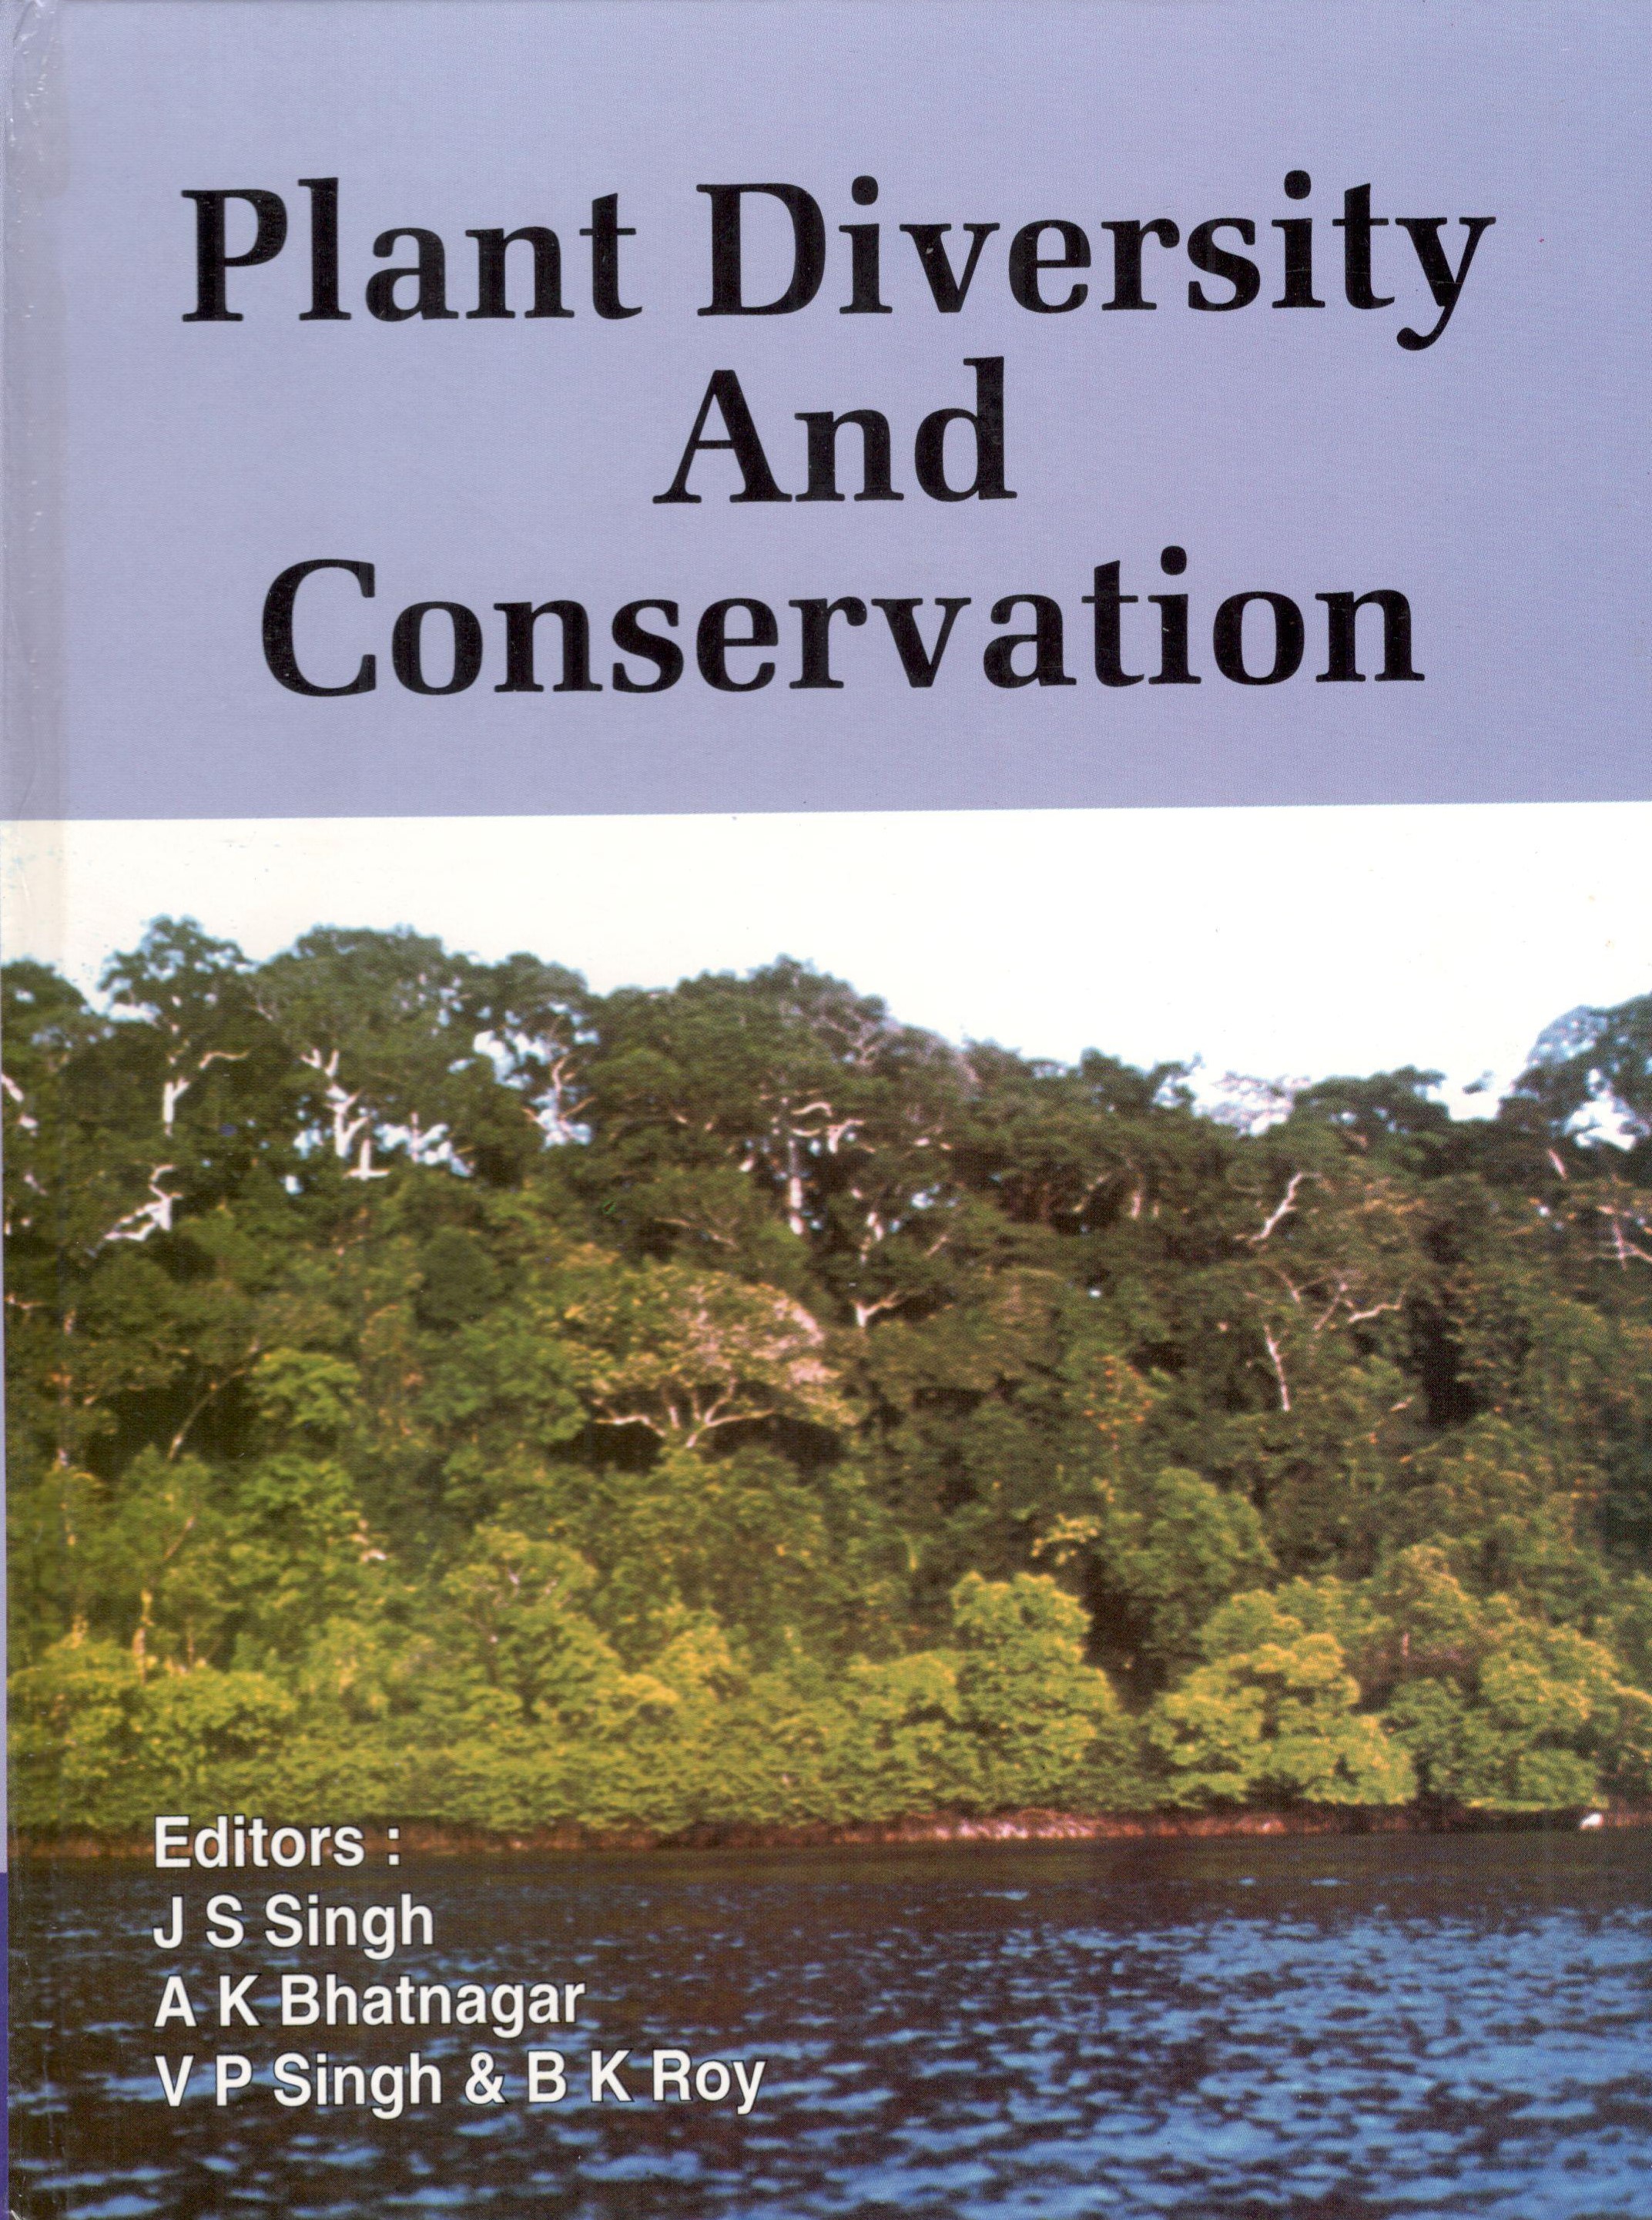 Plant Diversity And Conservation